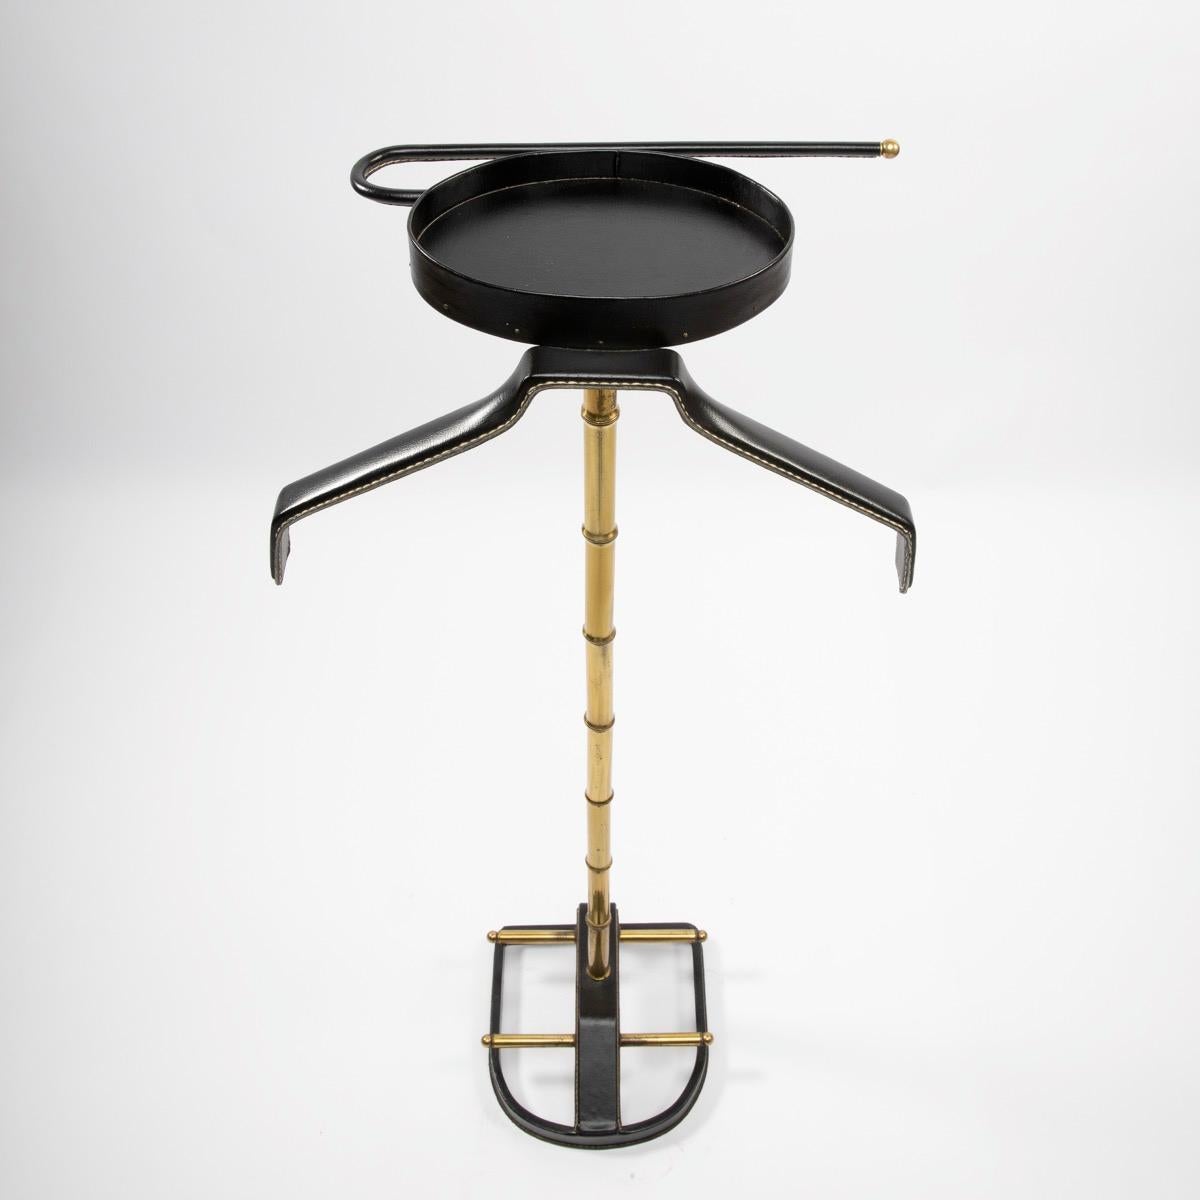 Mid-20th Century French Midcentury Valet Muet, Jacques Adnet, Steel, Black Leather, Brass